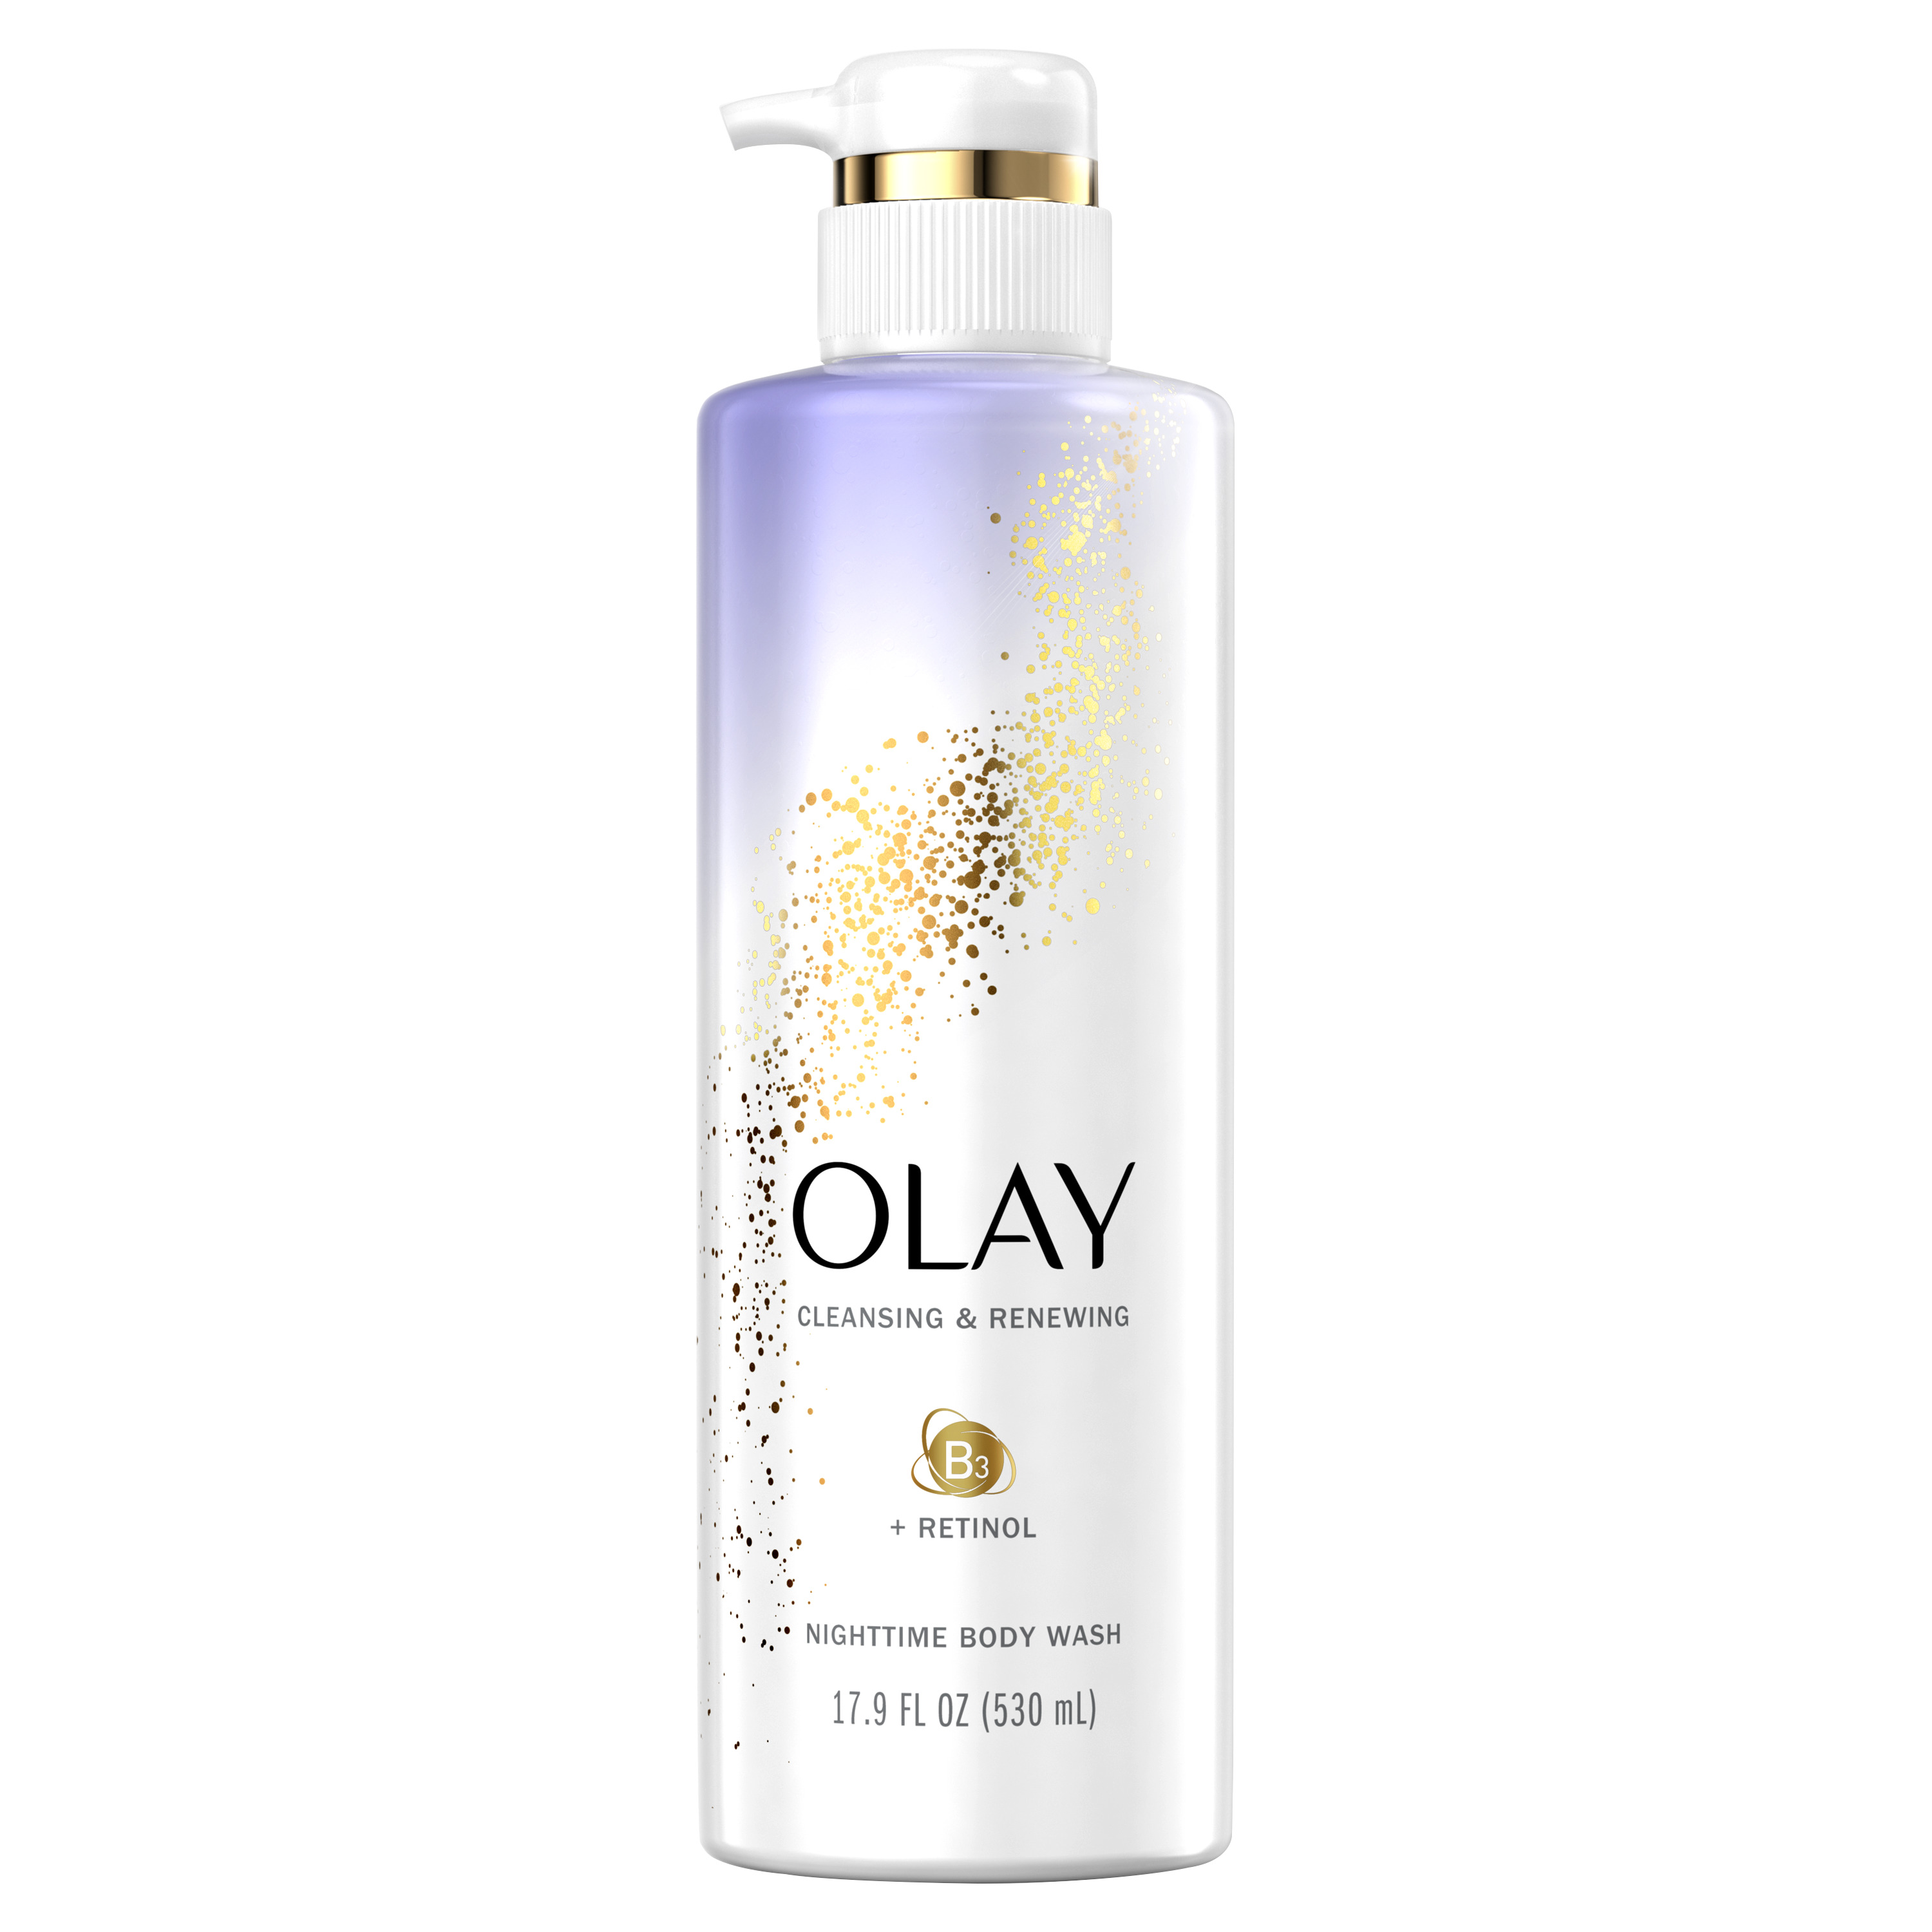 Olay Cleansing